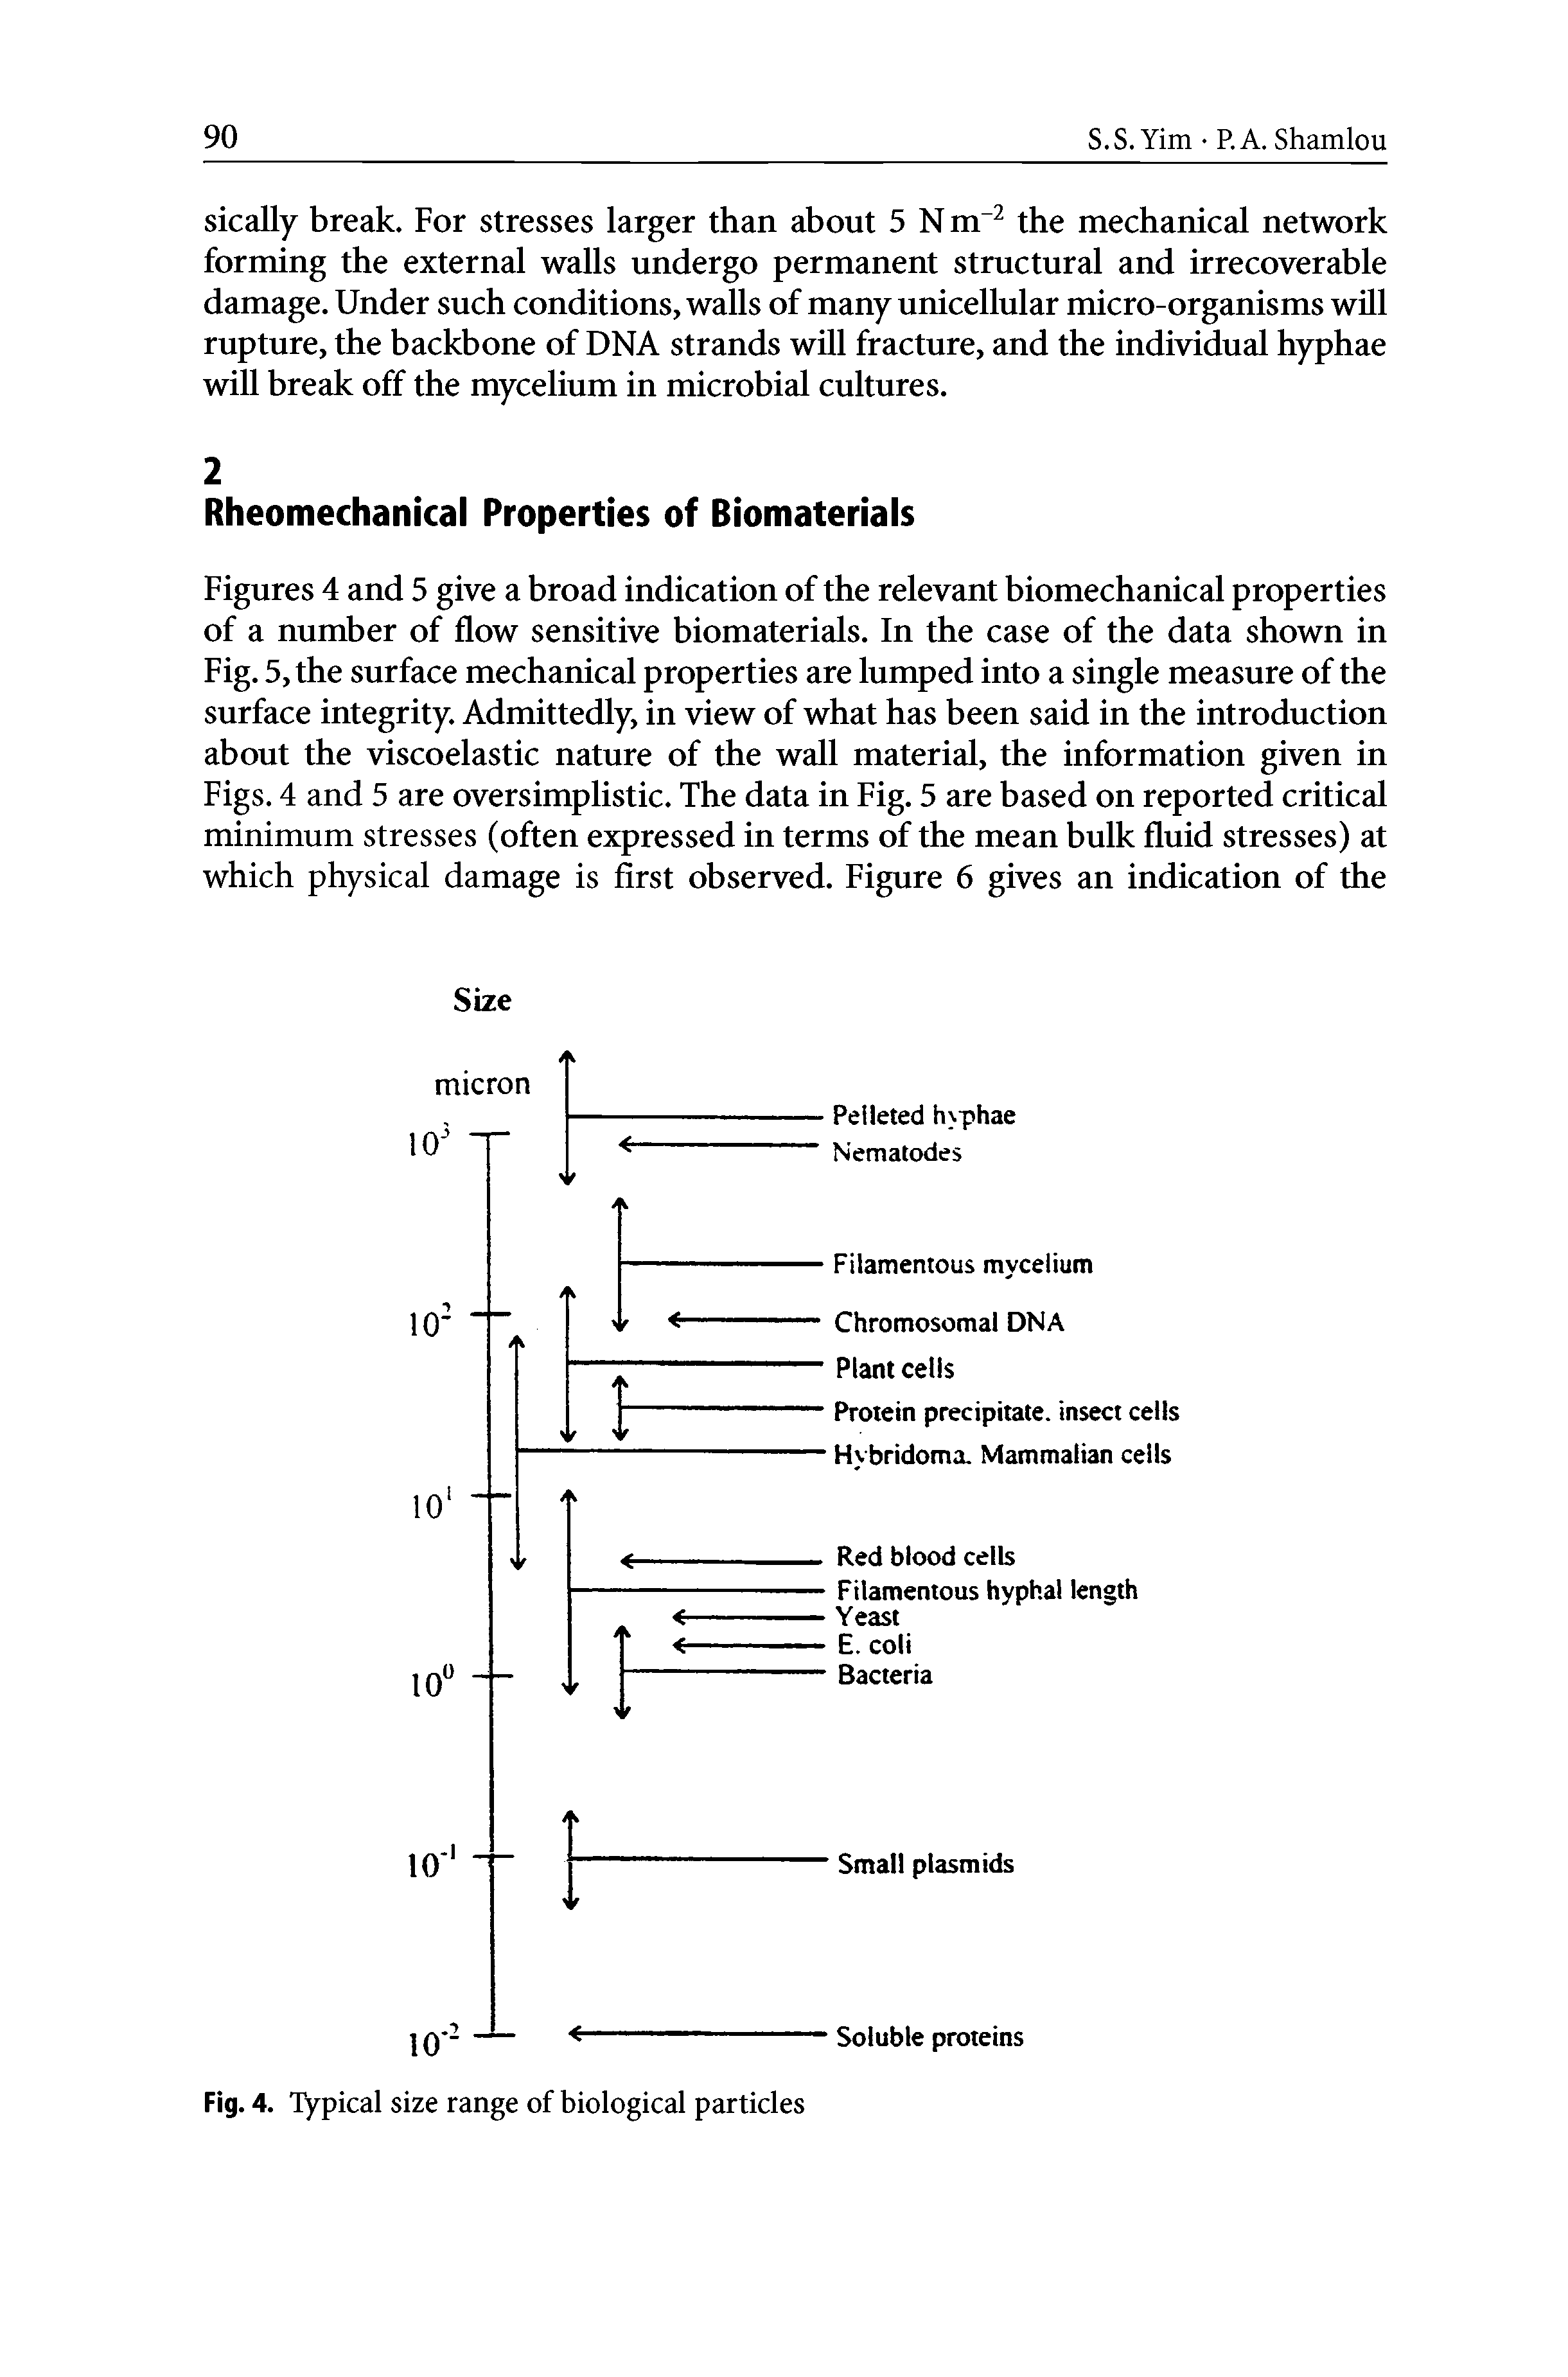 Figures 4 and 5 give a broad indication of the relevant biomechanical properties of a number of flow sensitive biomaterials. In the case of the data shown in Fig. 5, the surface mechanical properties are lumped into a single measure of the surface integrity. Admittedly, in view of what has been said in the introduction about the viscoelastic nature of the wall material, the information given in Figs. 4 and 5 are oversimplistic. The data in Fig. 5 are based on reported critical minimum stresses (often expressed in terms of the mean bulk fluid stresses) at which physical damage is first observed. Figure 6 gives an indication of the...